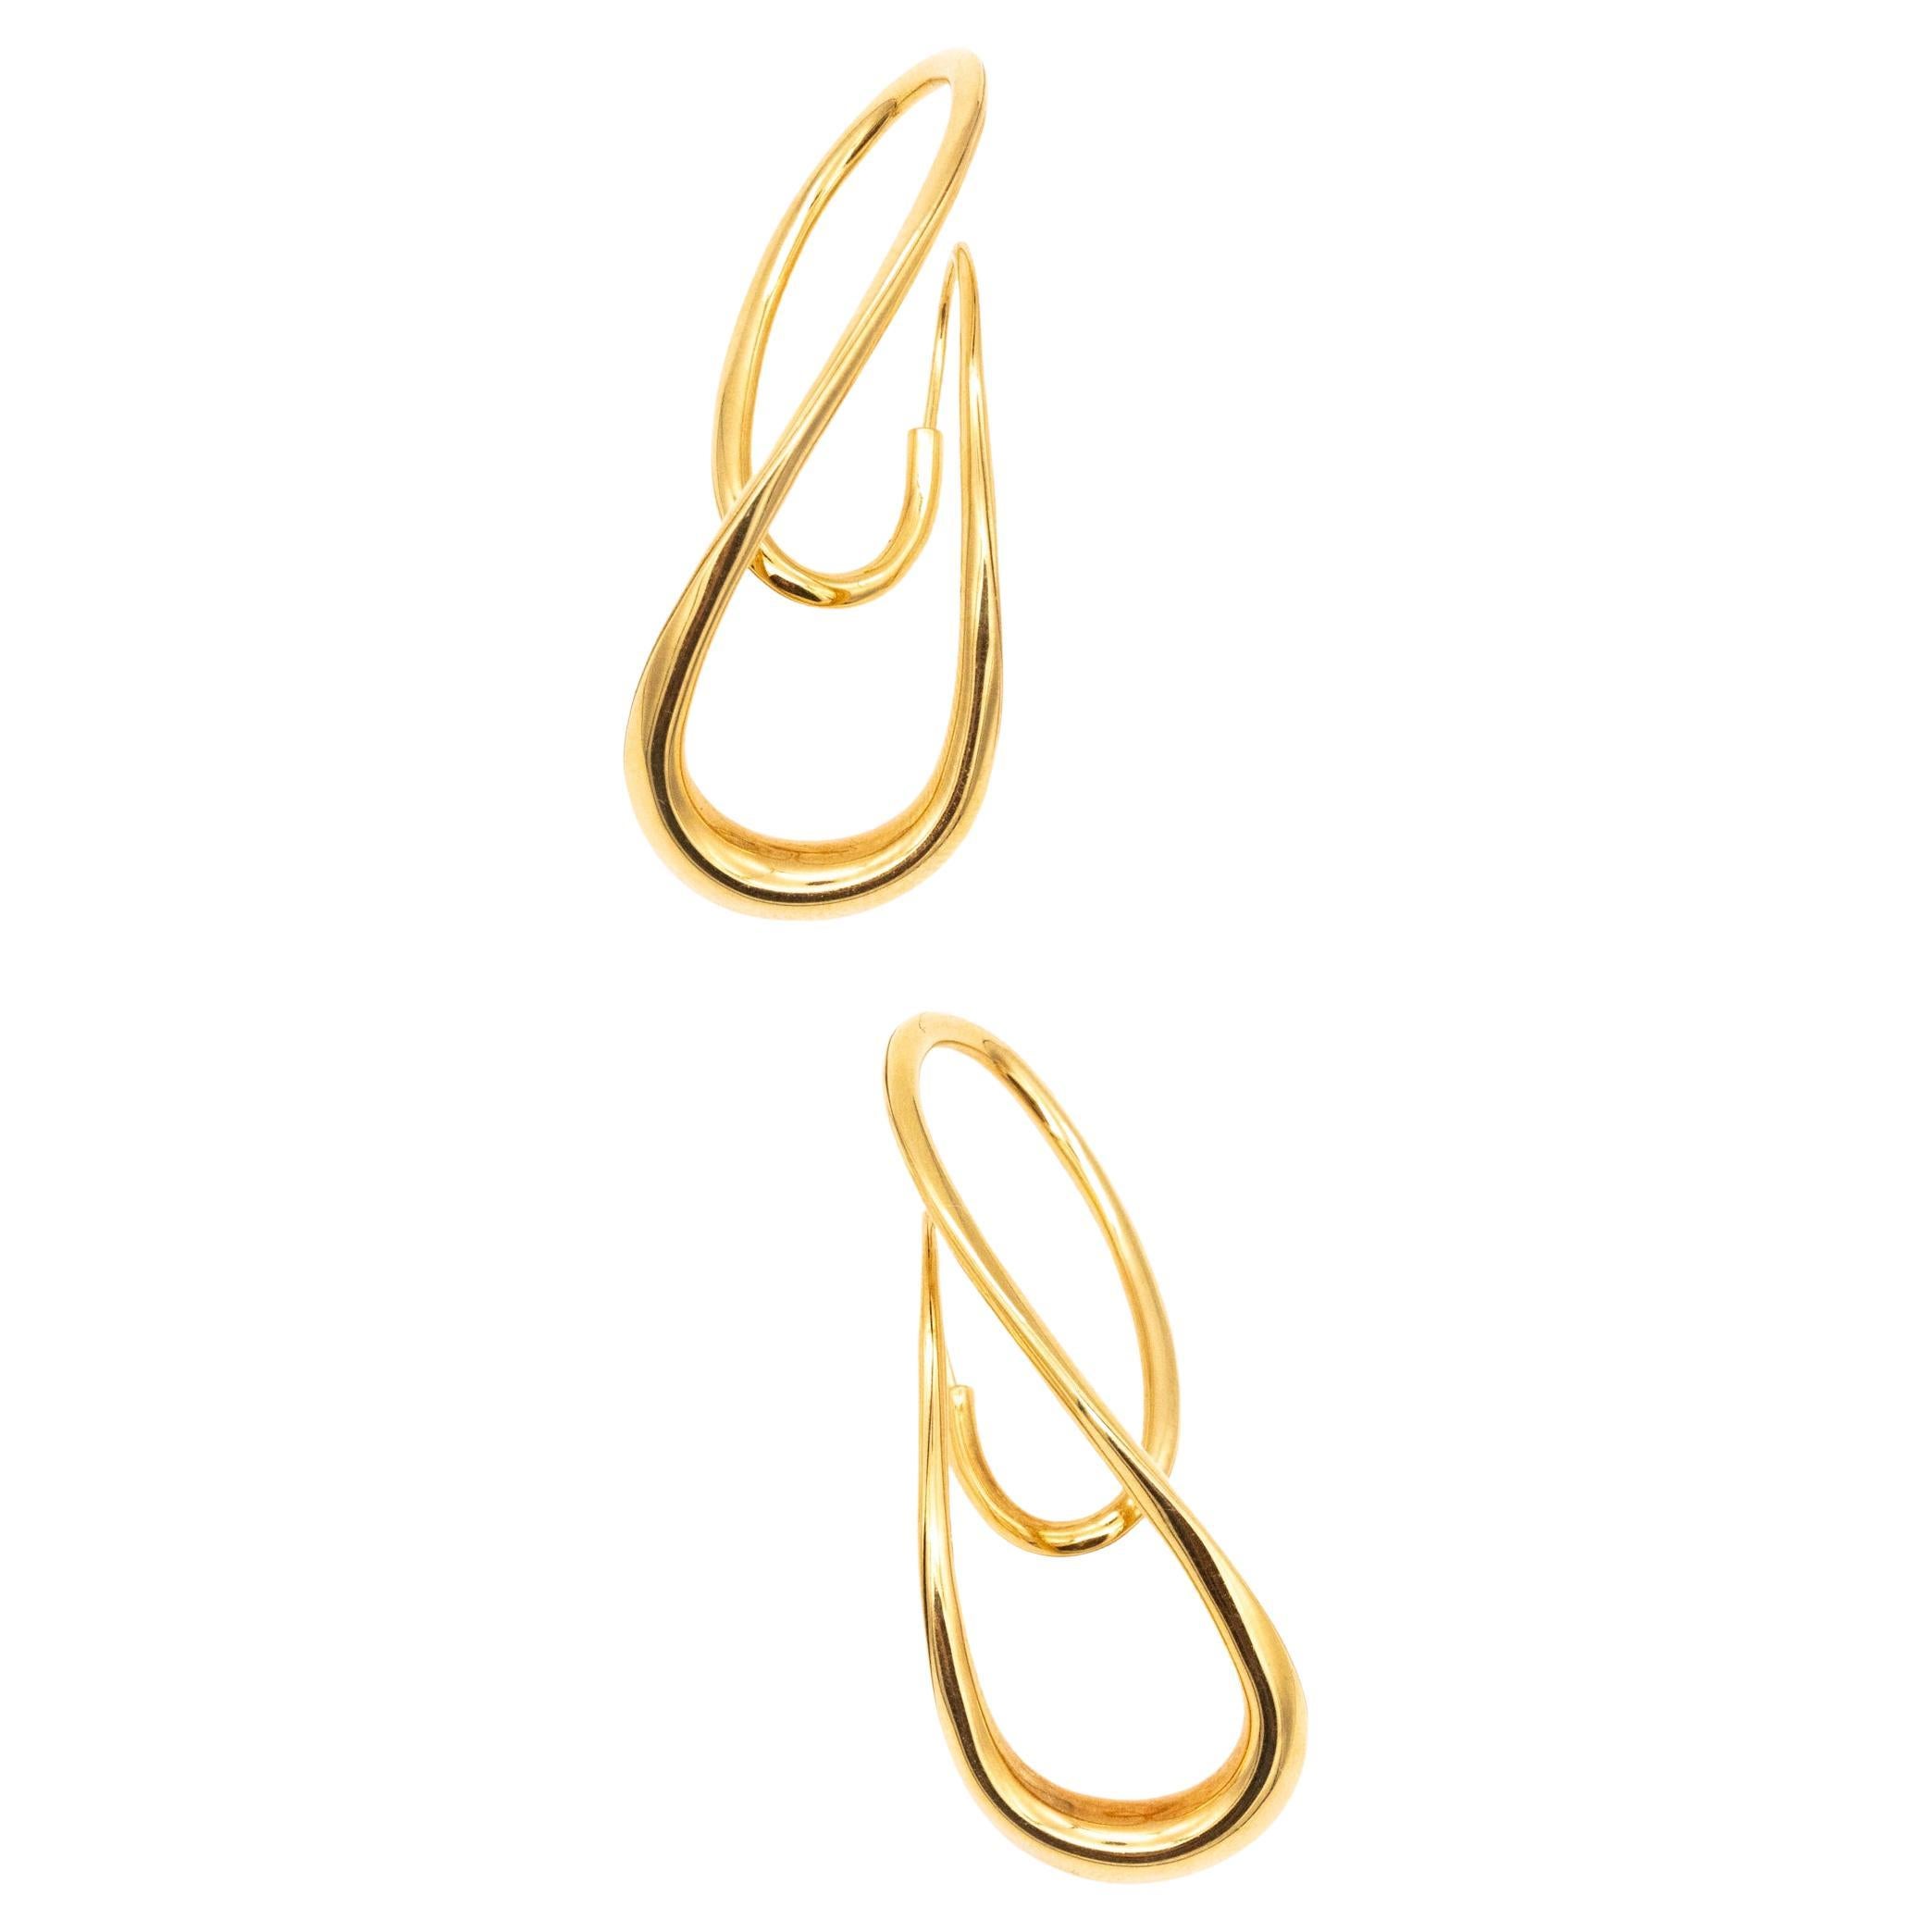 Michael Good Aerodynamic Double Twisted Ear Drops in 18Kt Yellow Gold